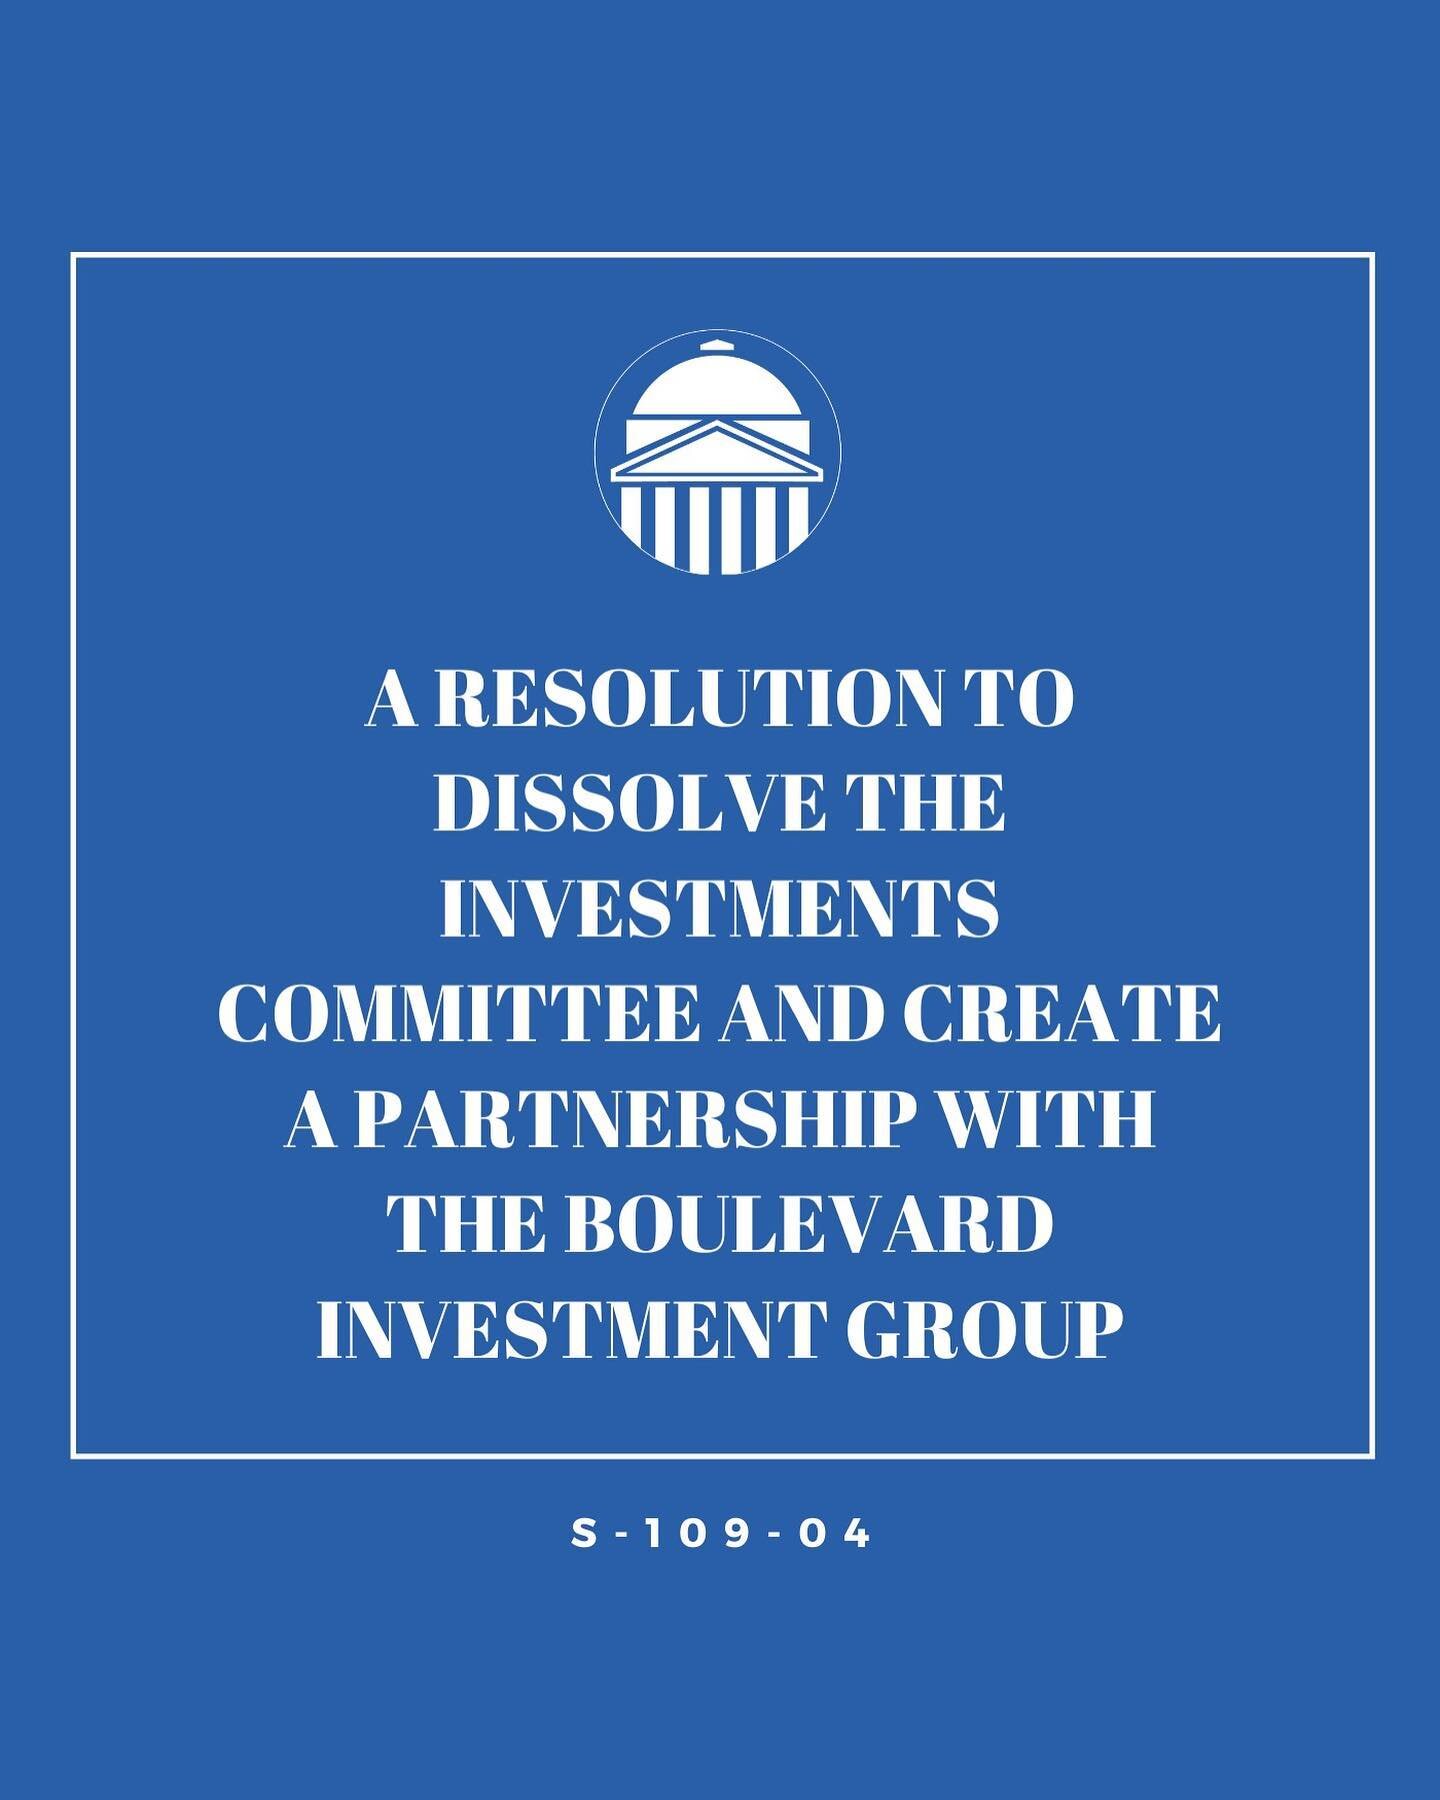 LEGISLATION! A resolution to dissolve the investments committee and create a partnership with the Boulevard Investment Group!